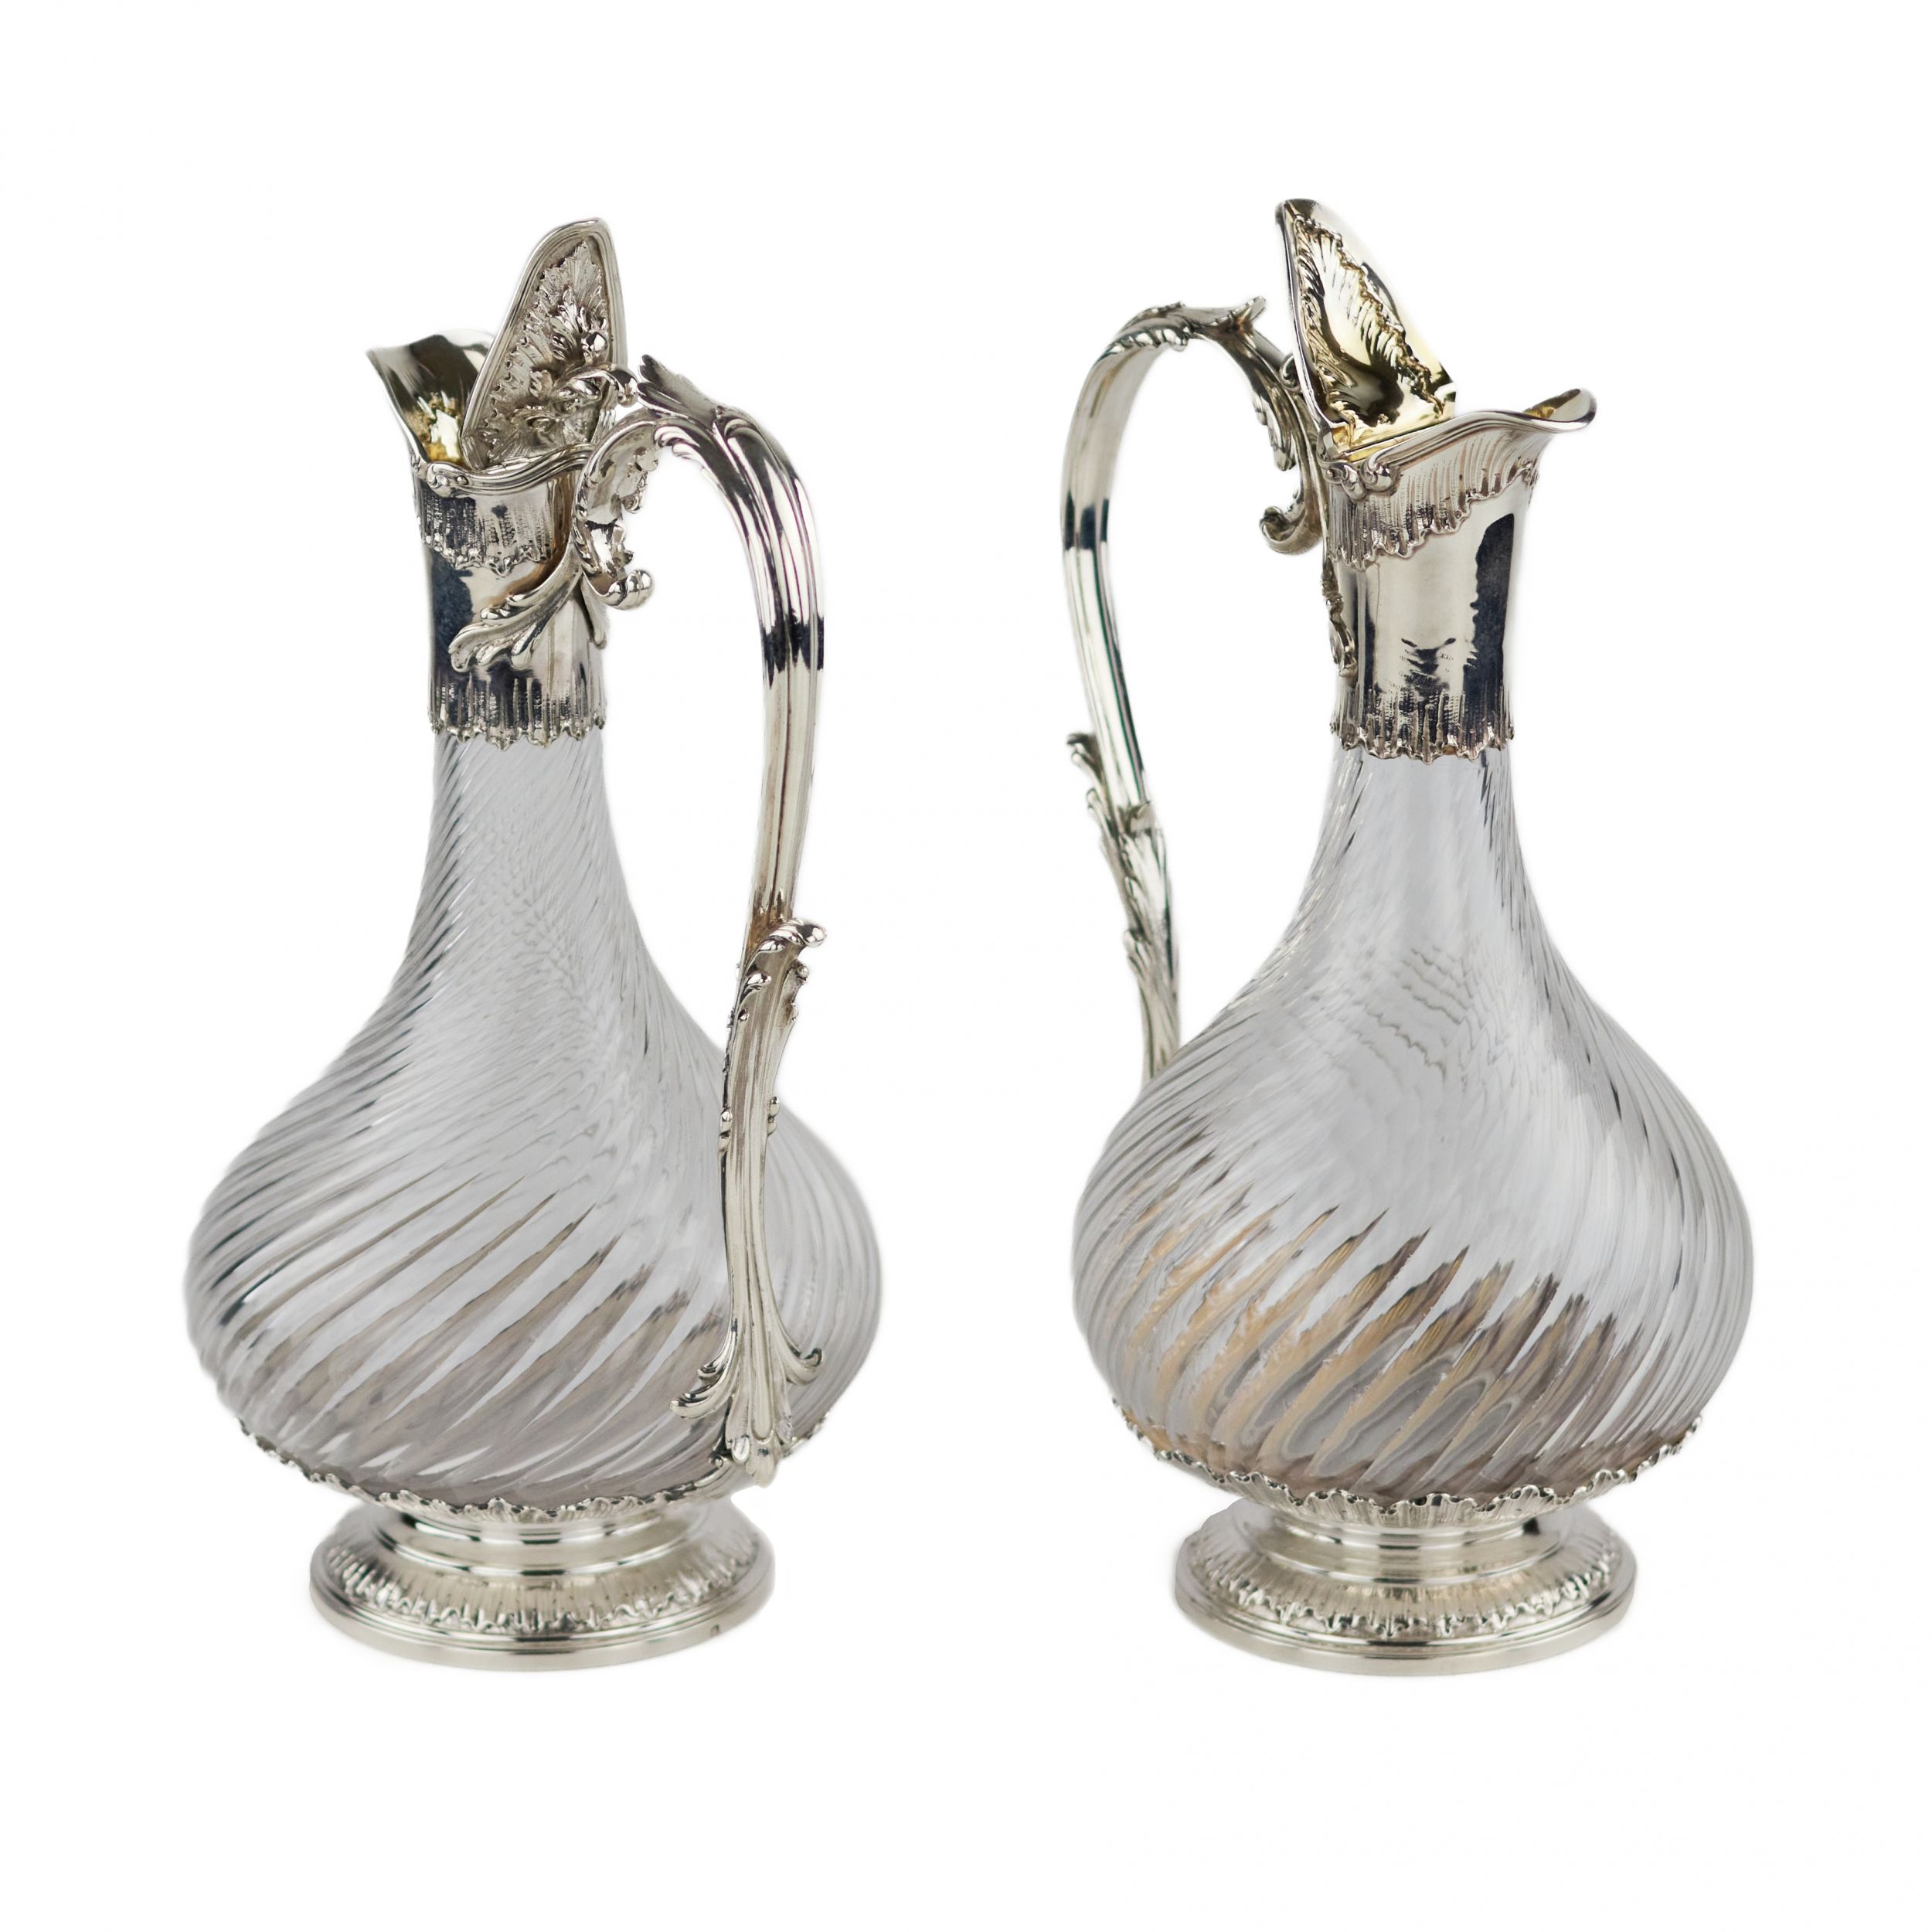 Pair of French, spiral glass wine jugs with silver. Late 19th century. - Image 3 of 6